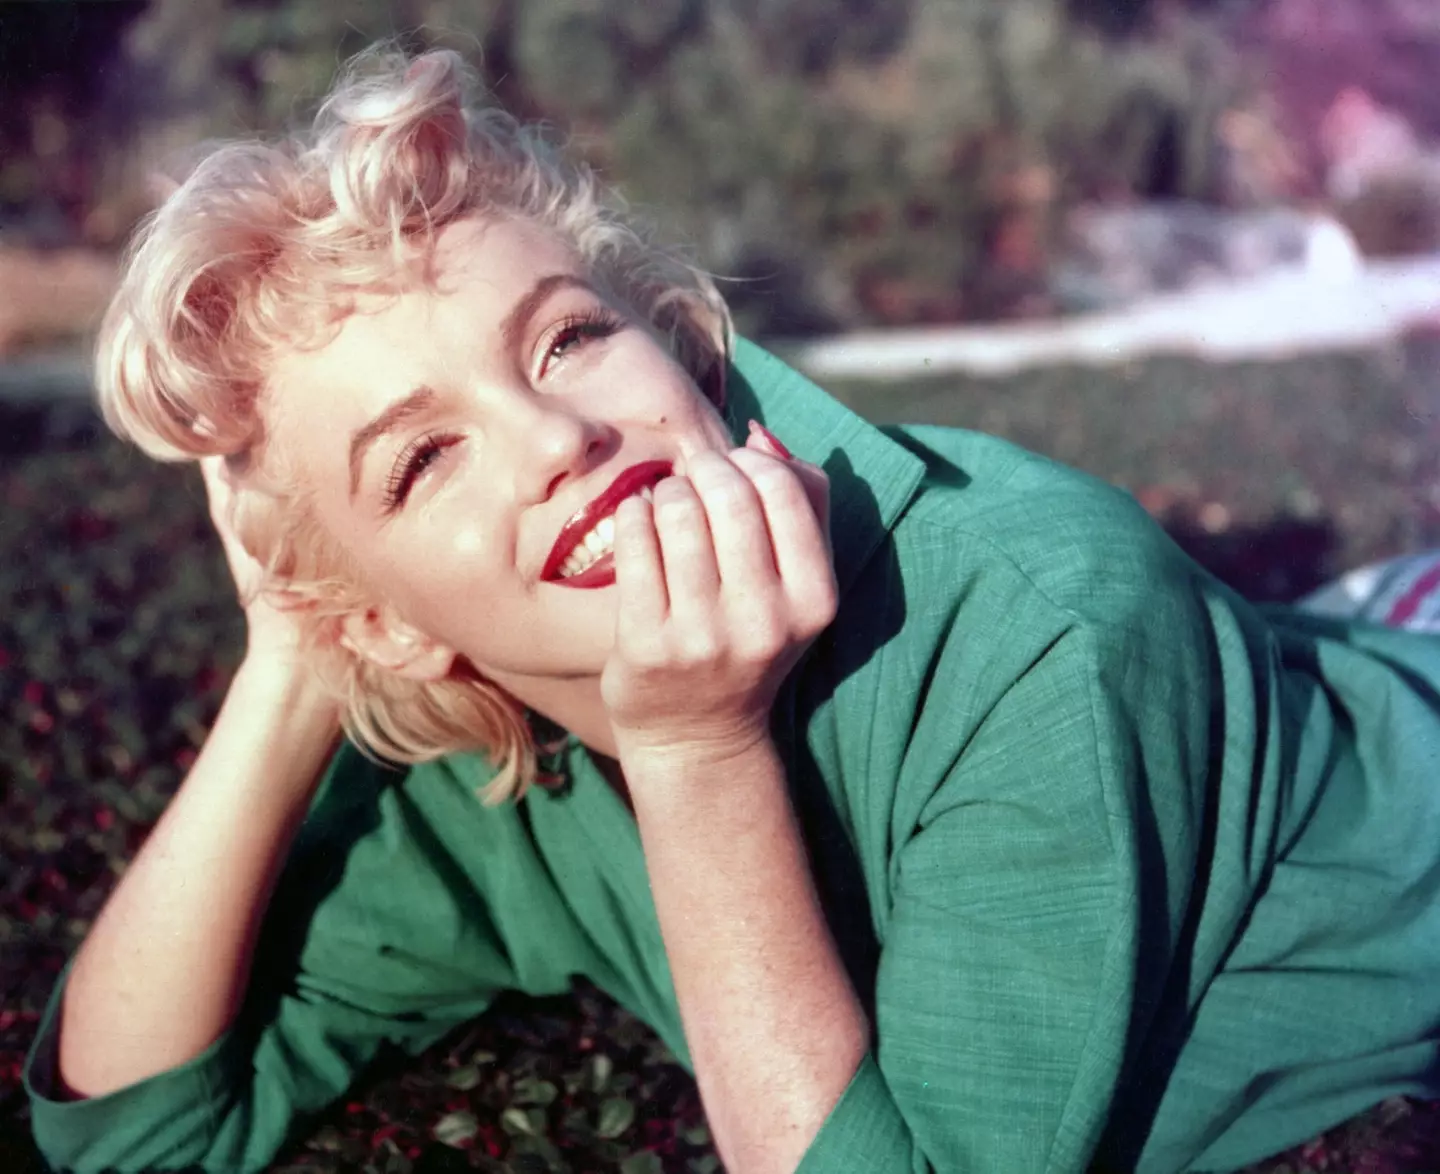 Marilyn Monroe had her appendix removed in 1952 (Baron/Hulton Archive/Getty Images)